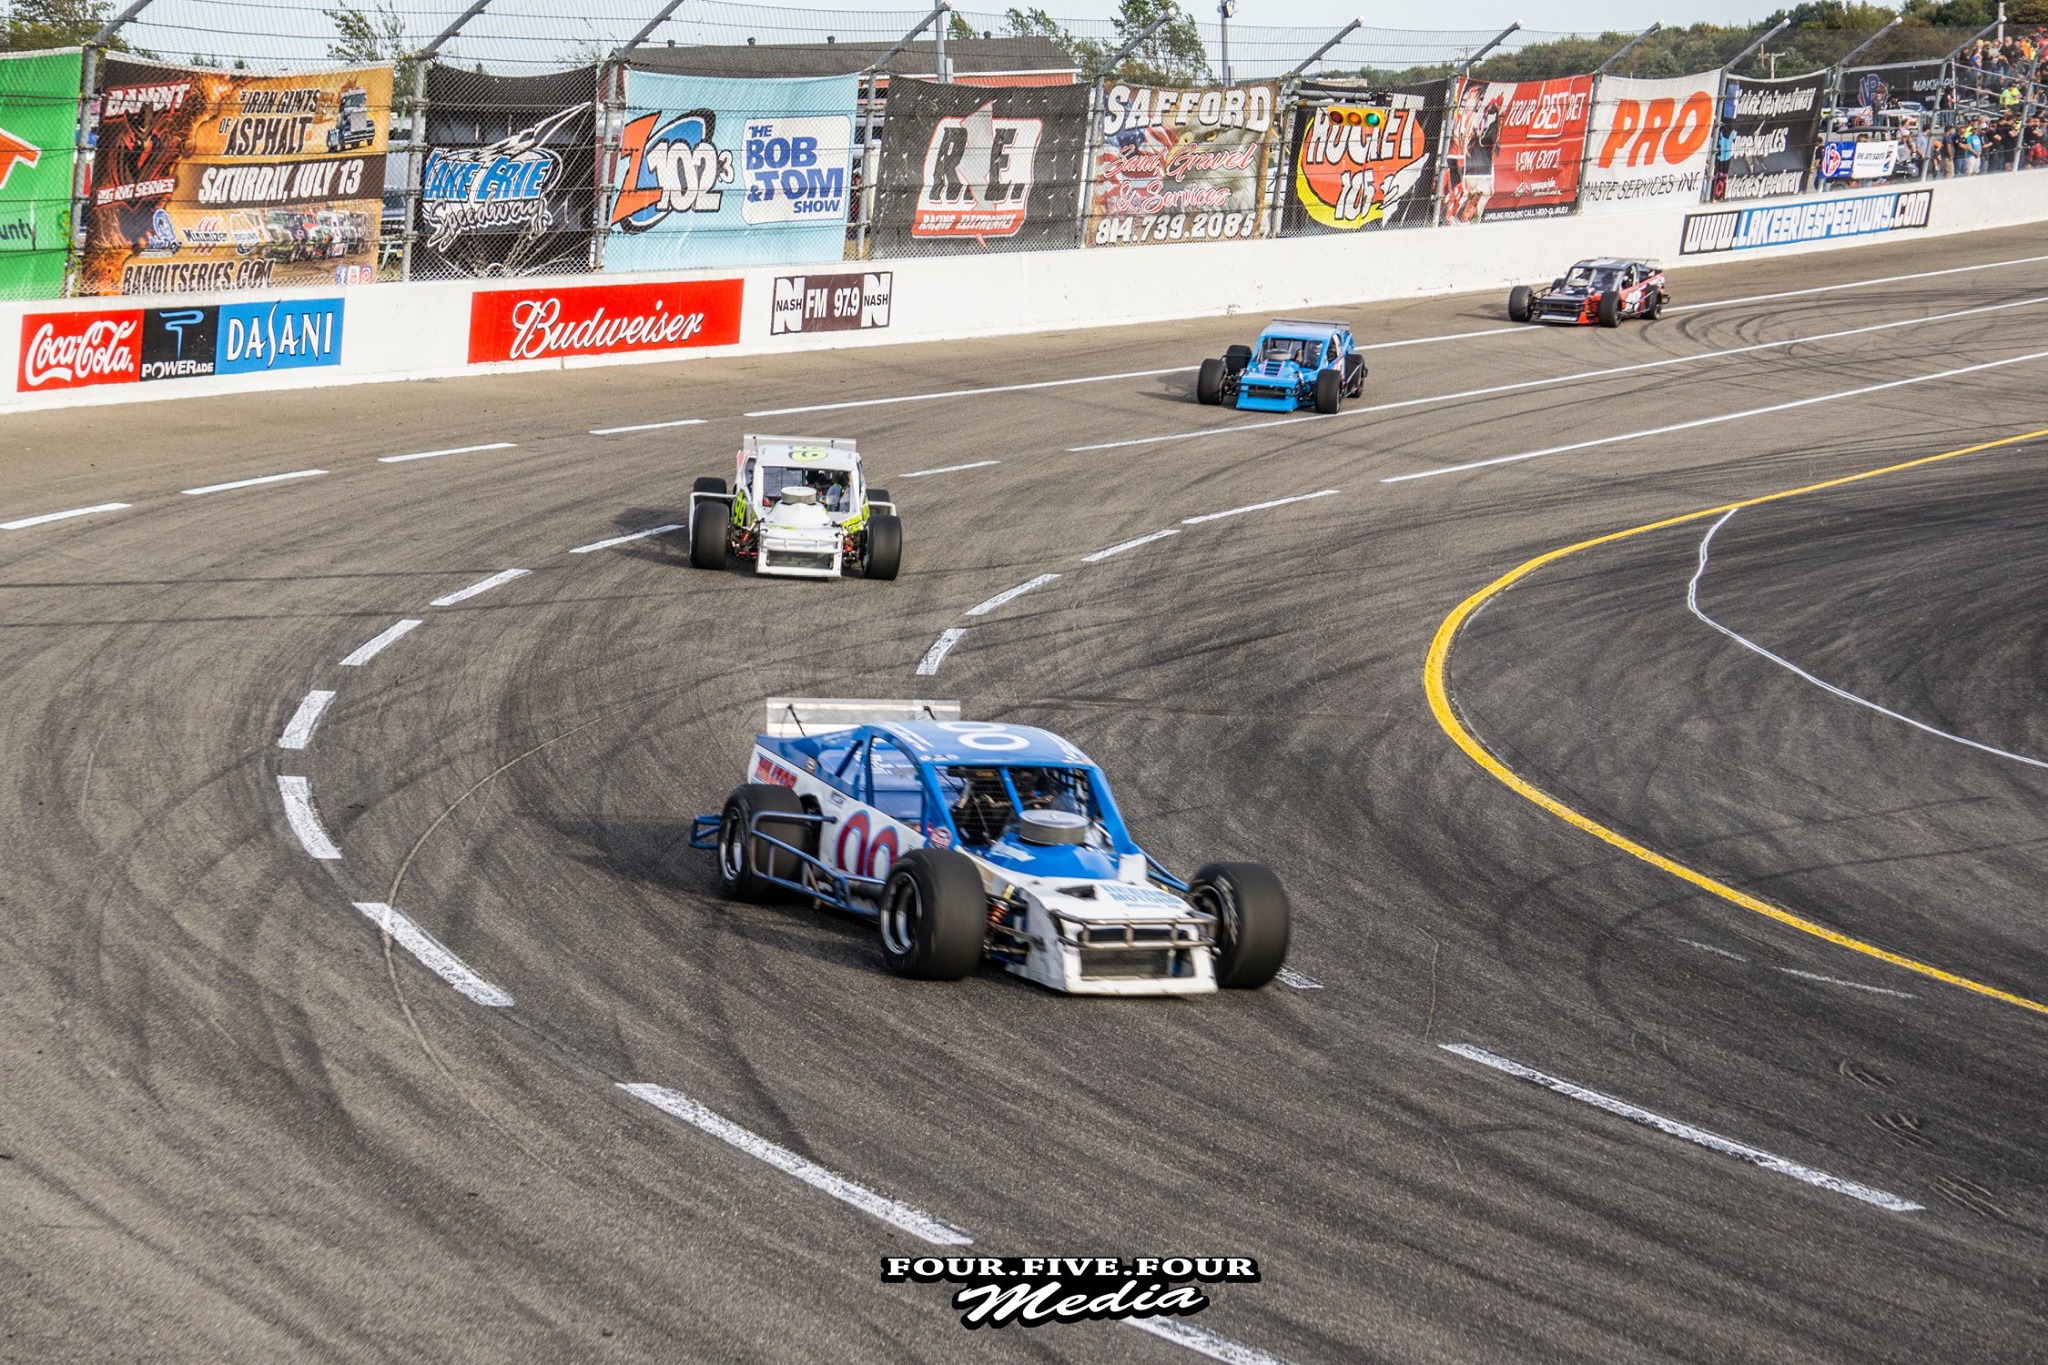 Night at the Races featuring ROC Sportsmen Modifieds